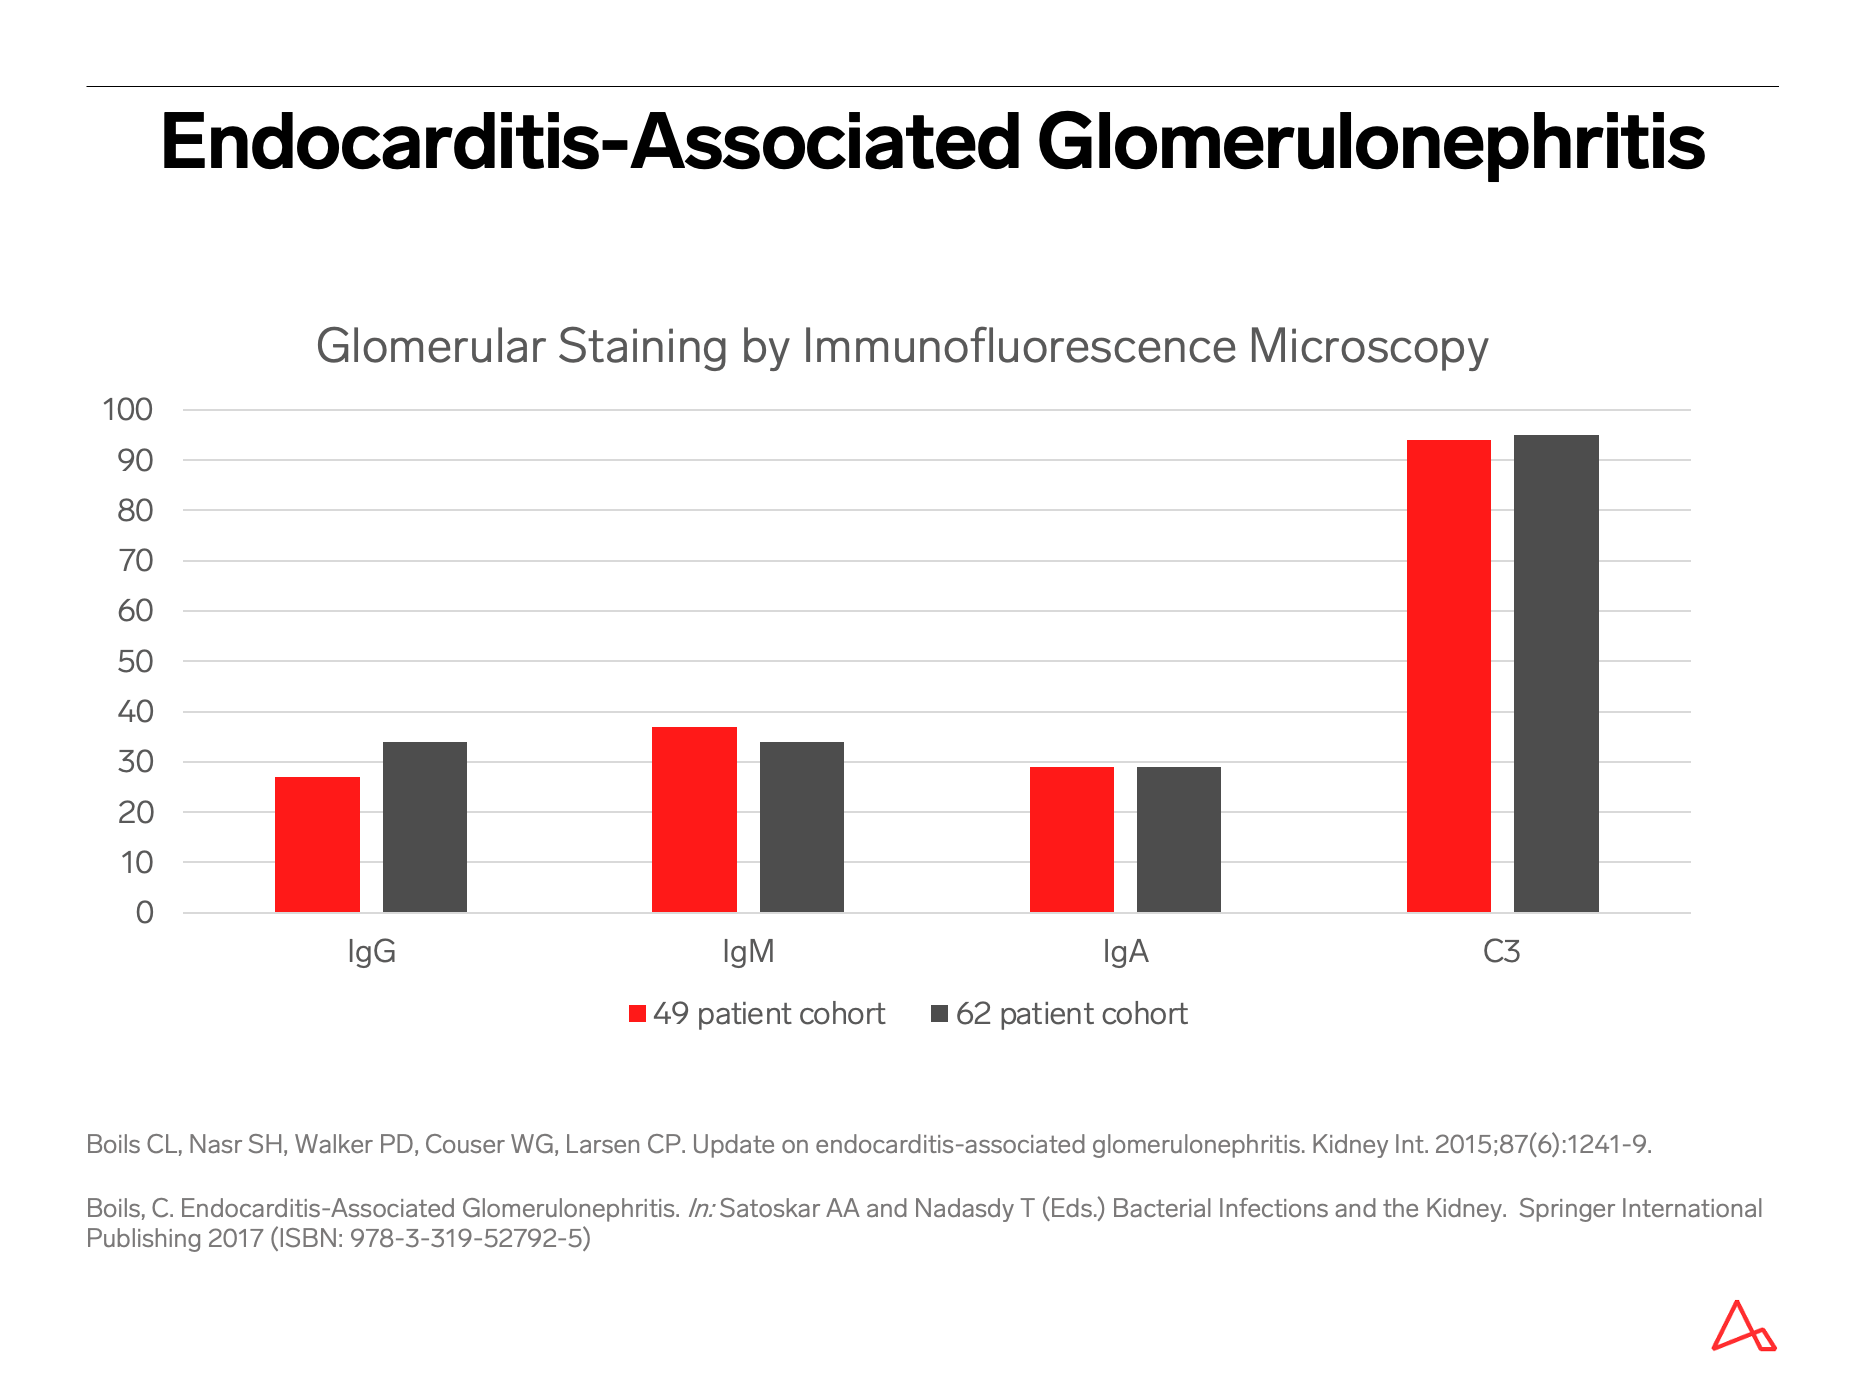 Bacterial infection-associated glomerulonephritis and endocarditis-associated glomerulonephritis  